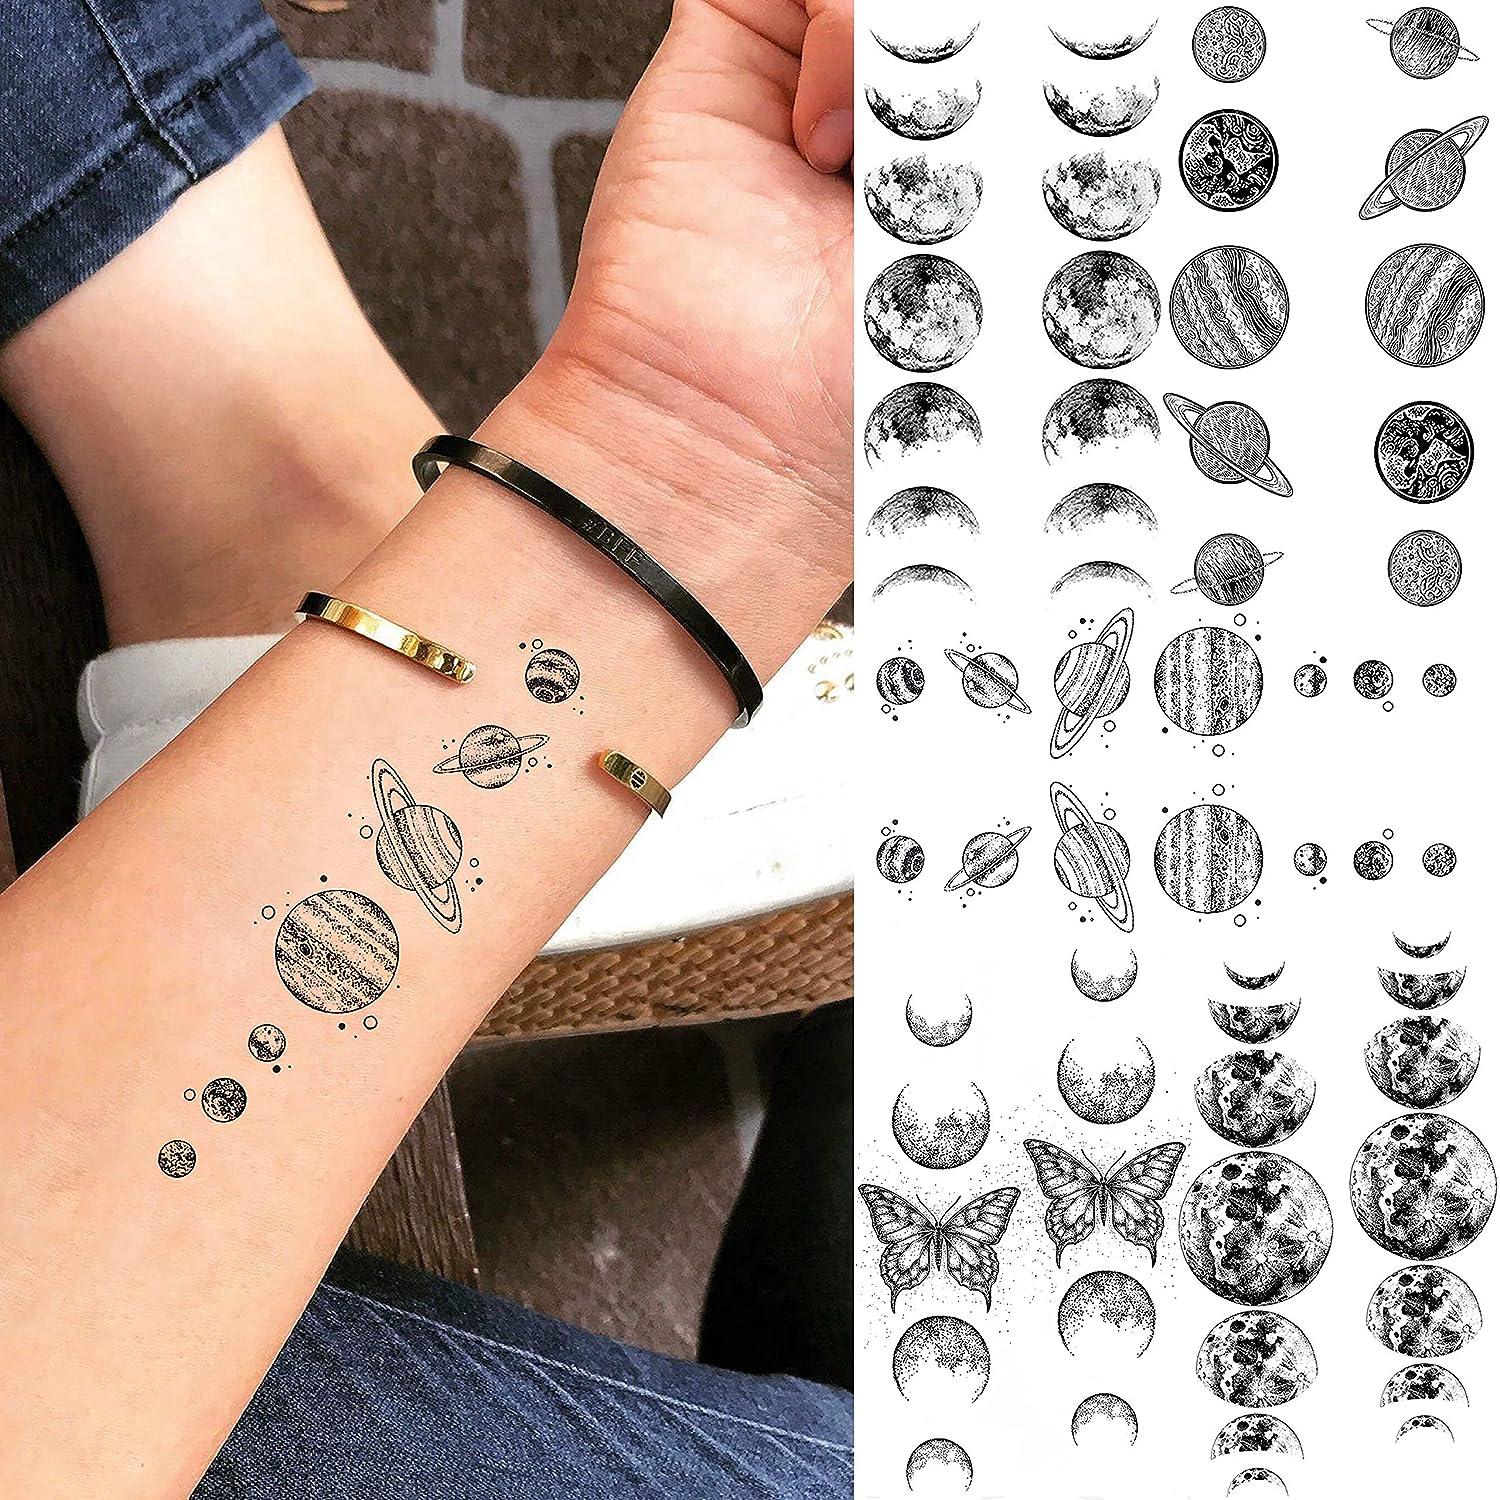 Rock Star Temporary Tattoos: Jam Out in Style - Ducky Street